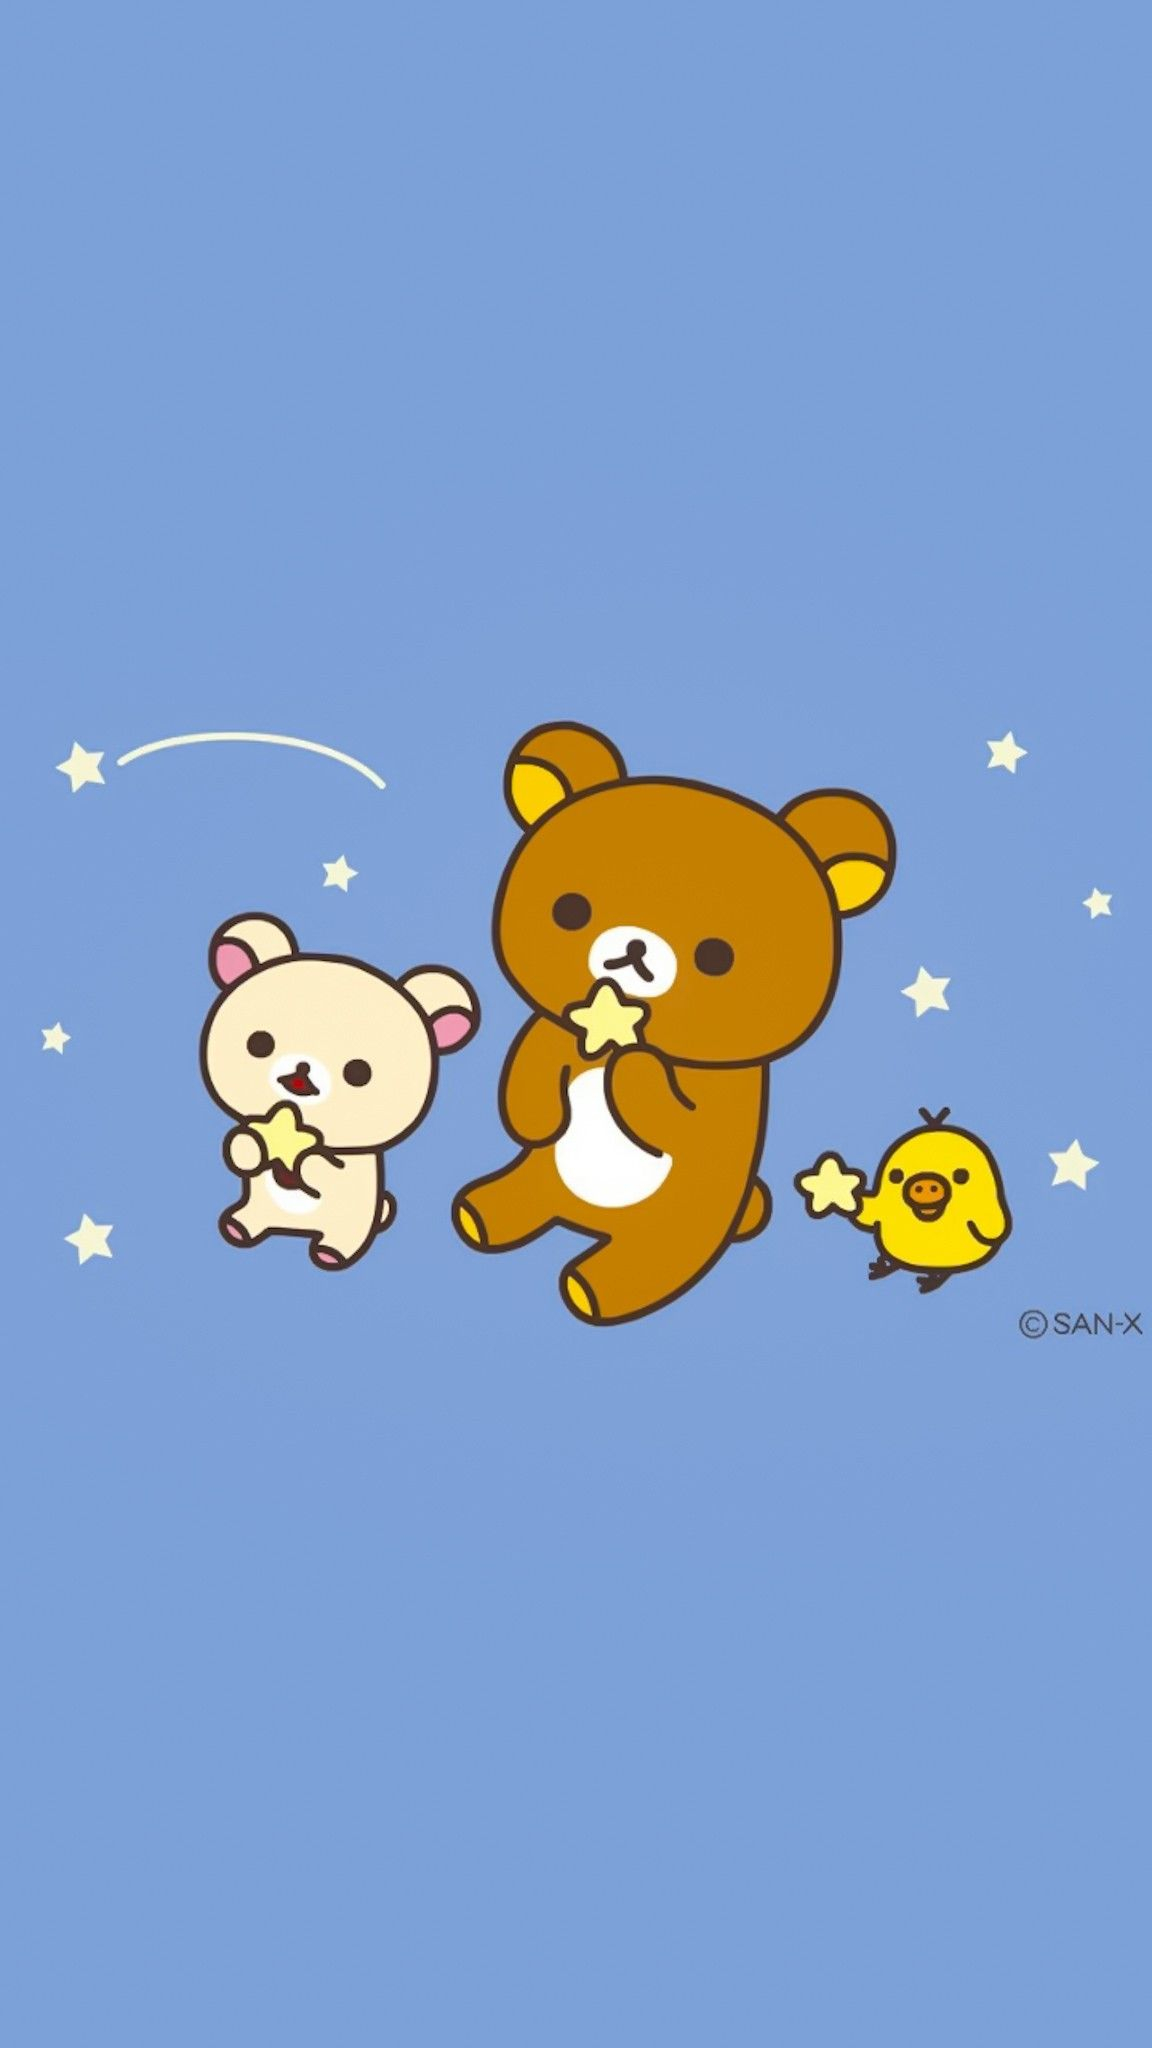 1152x2048 Pin by Gabby on wallpapers in 2022 | Rilakkuma wallpaper, Rilakuma wallpapers, Sanrio wallpaper